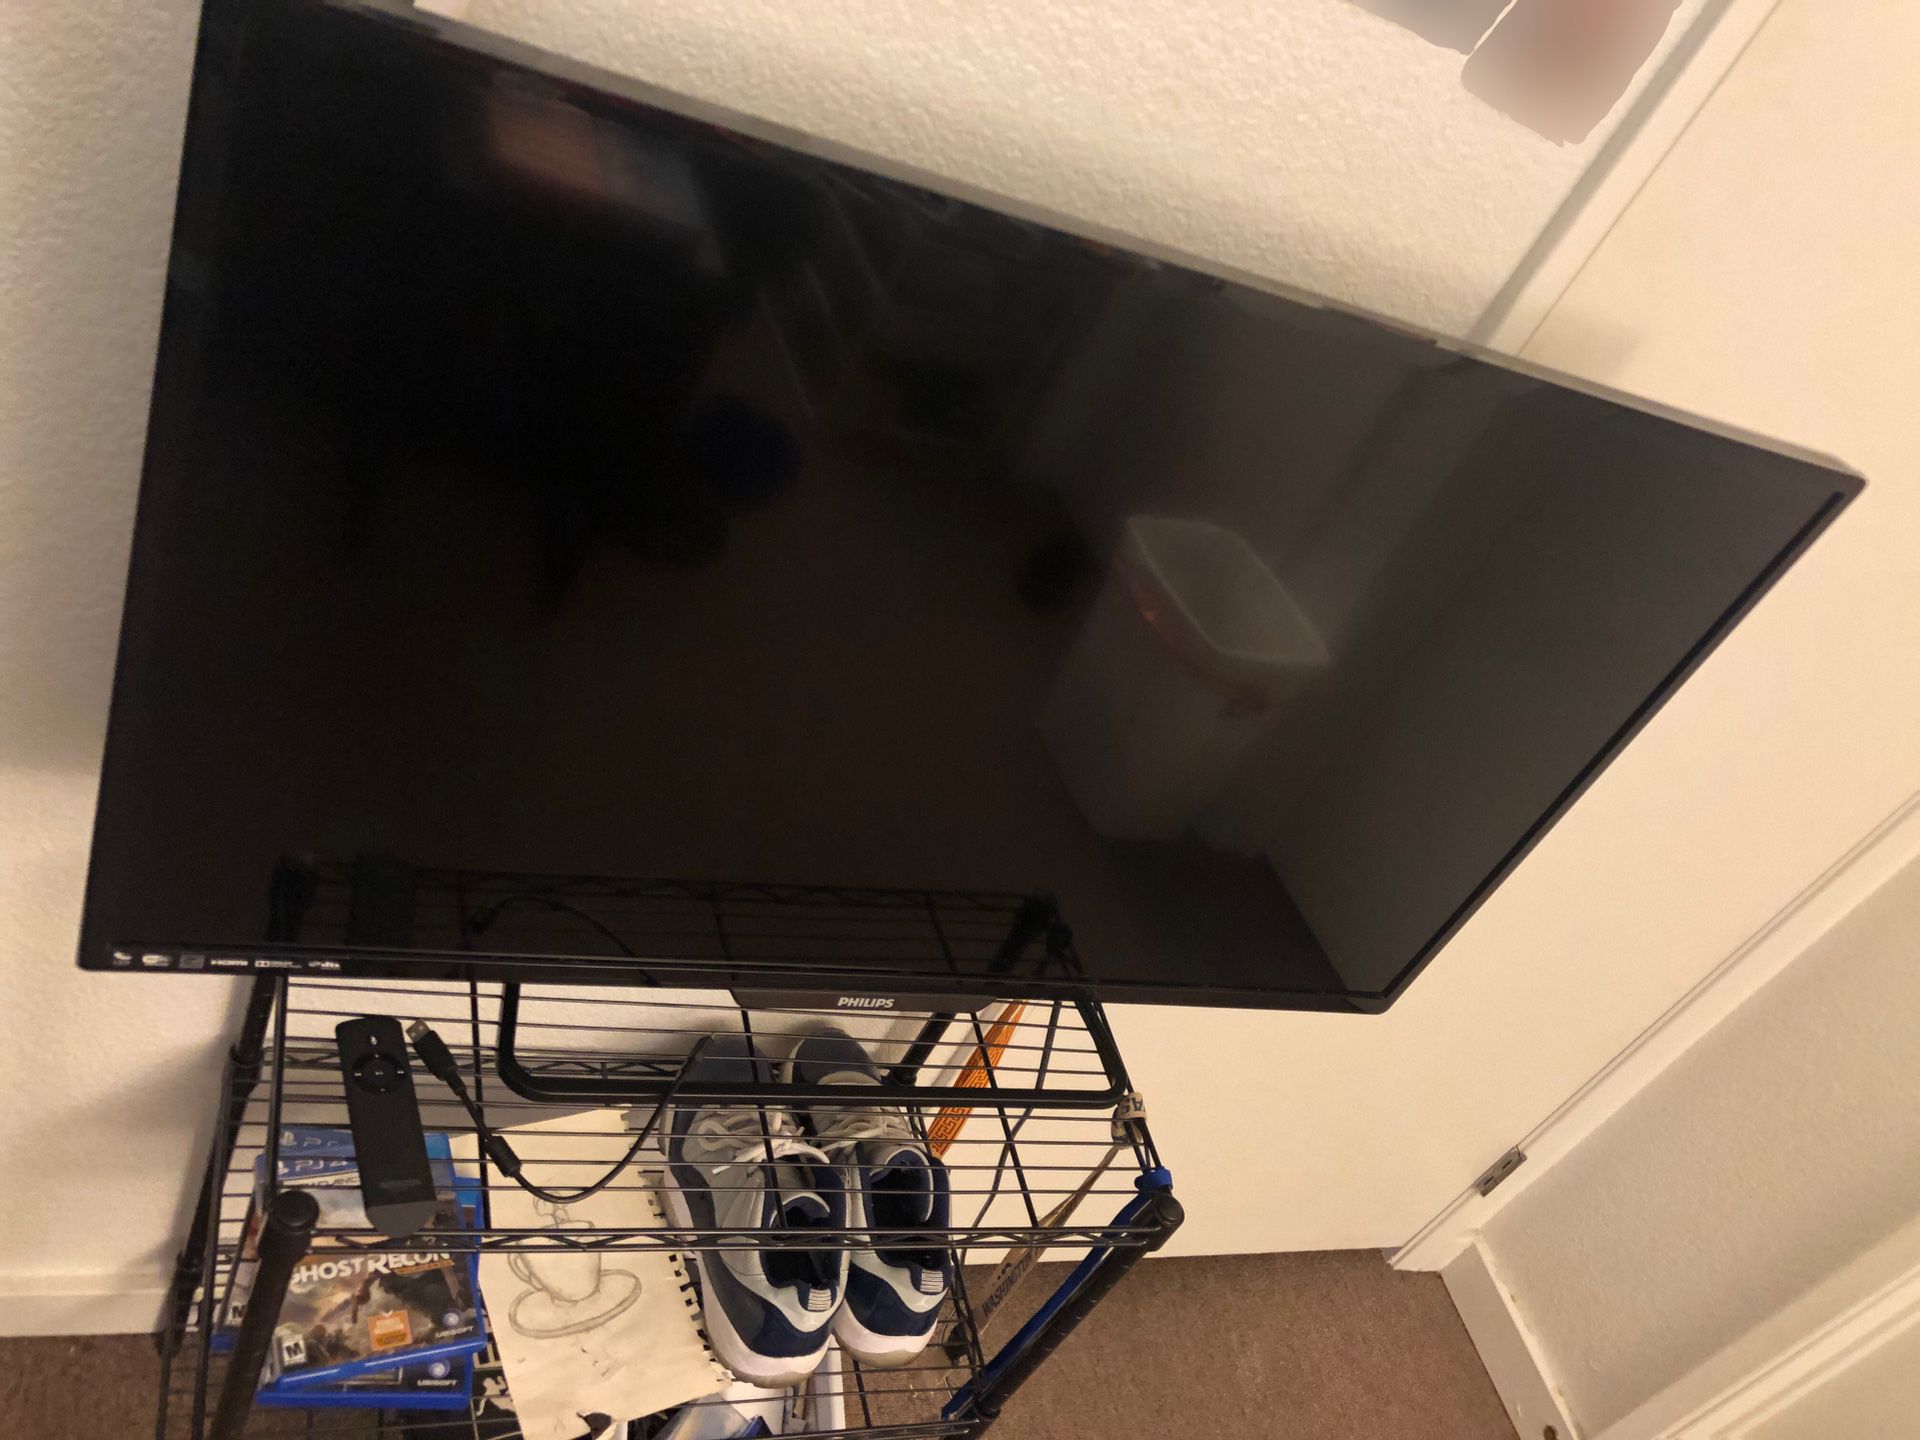 Phillips 4000 Series 40 Inch Tv w/ special gift included!! 9/10 Condition :)